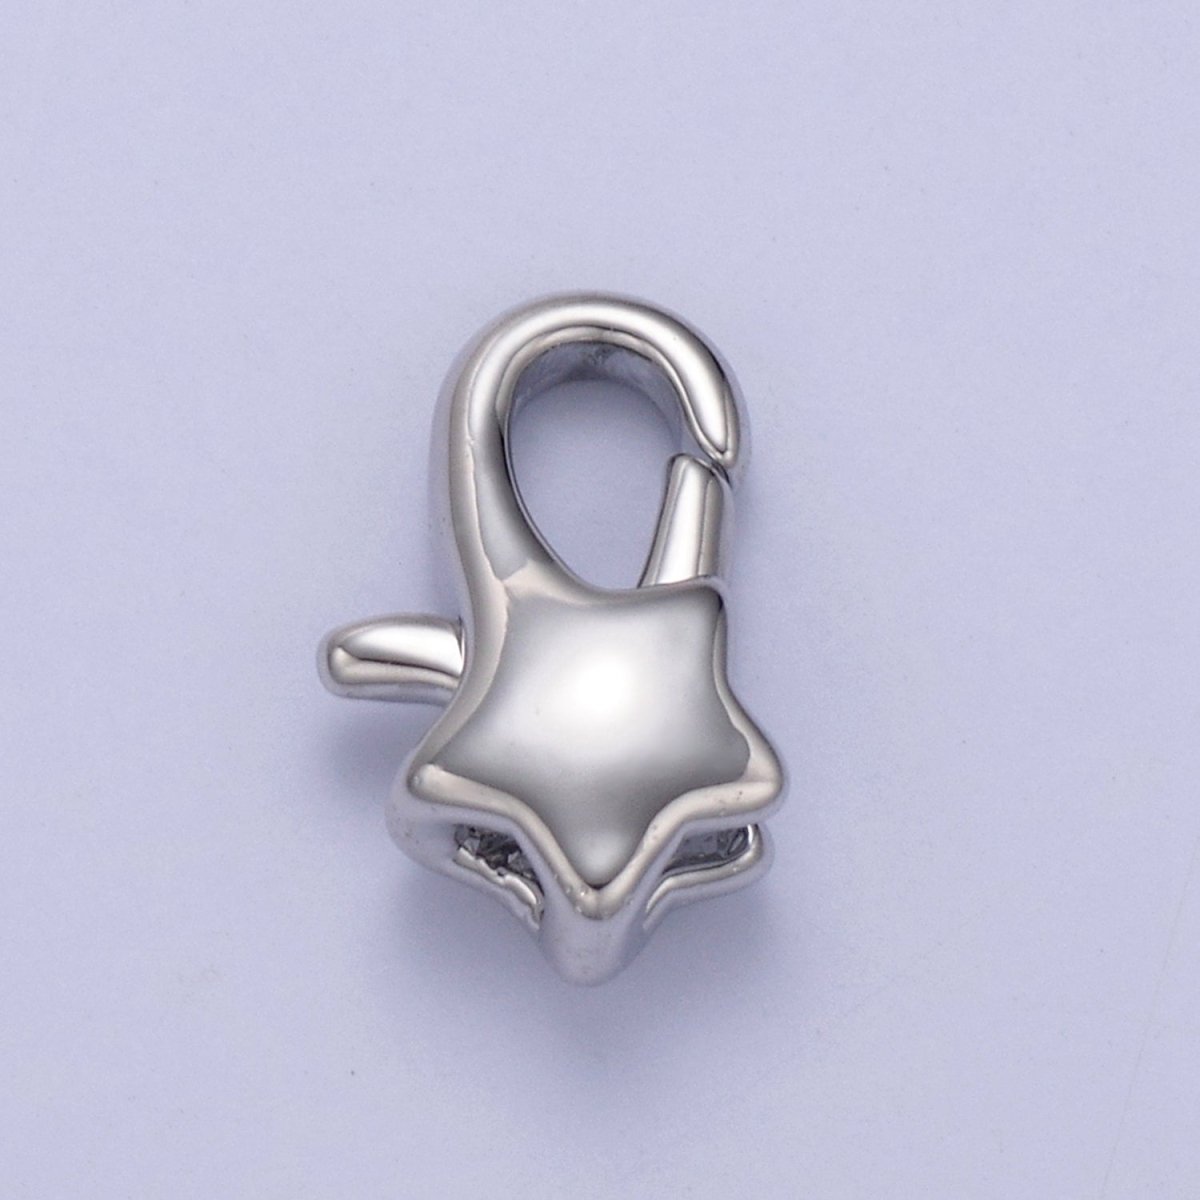 Wholesale Gold Filled Star Lobster Clasp Tiny Star Trigger Clasp – Celestial Lobster Claw for Jewelry Making Supplies L-652 L-653 - DLUXCA